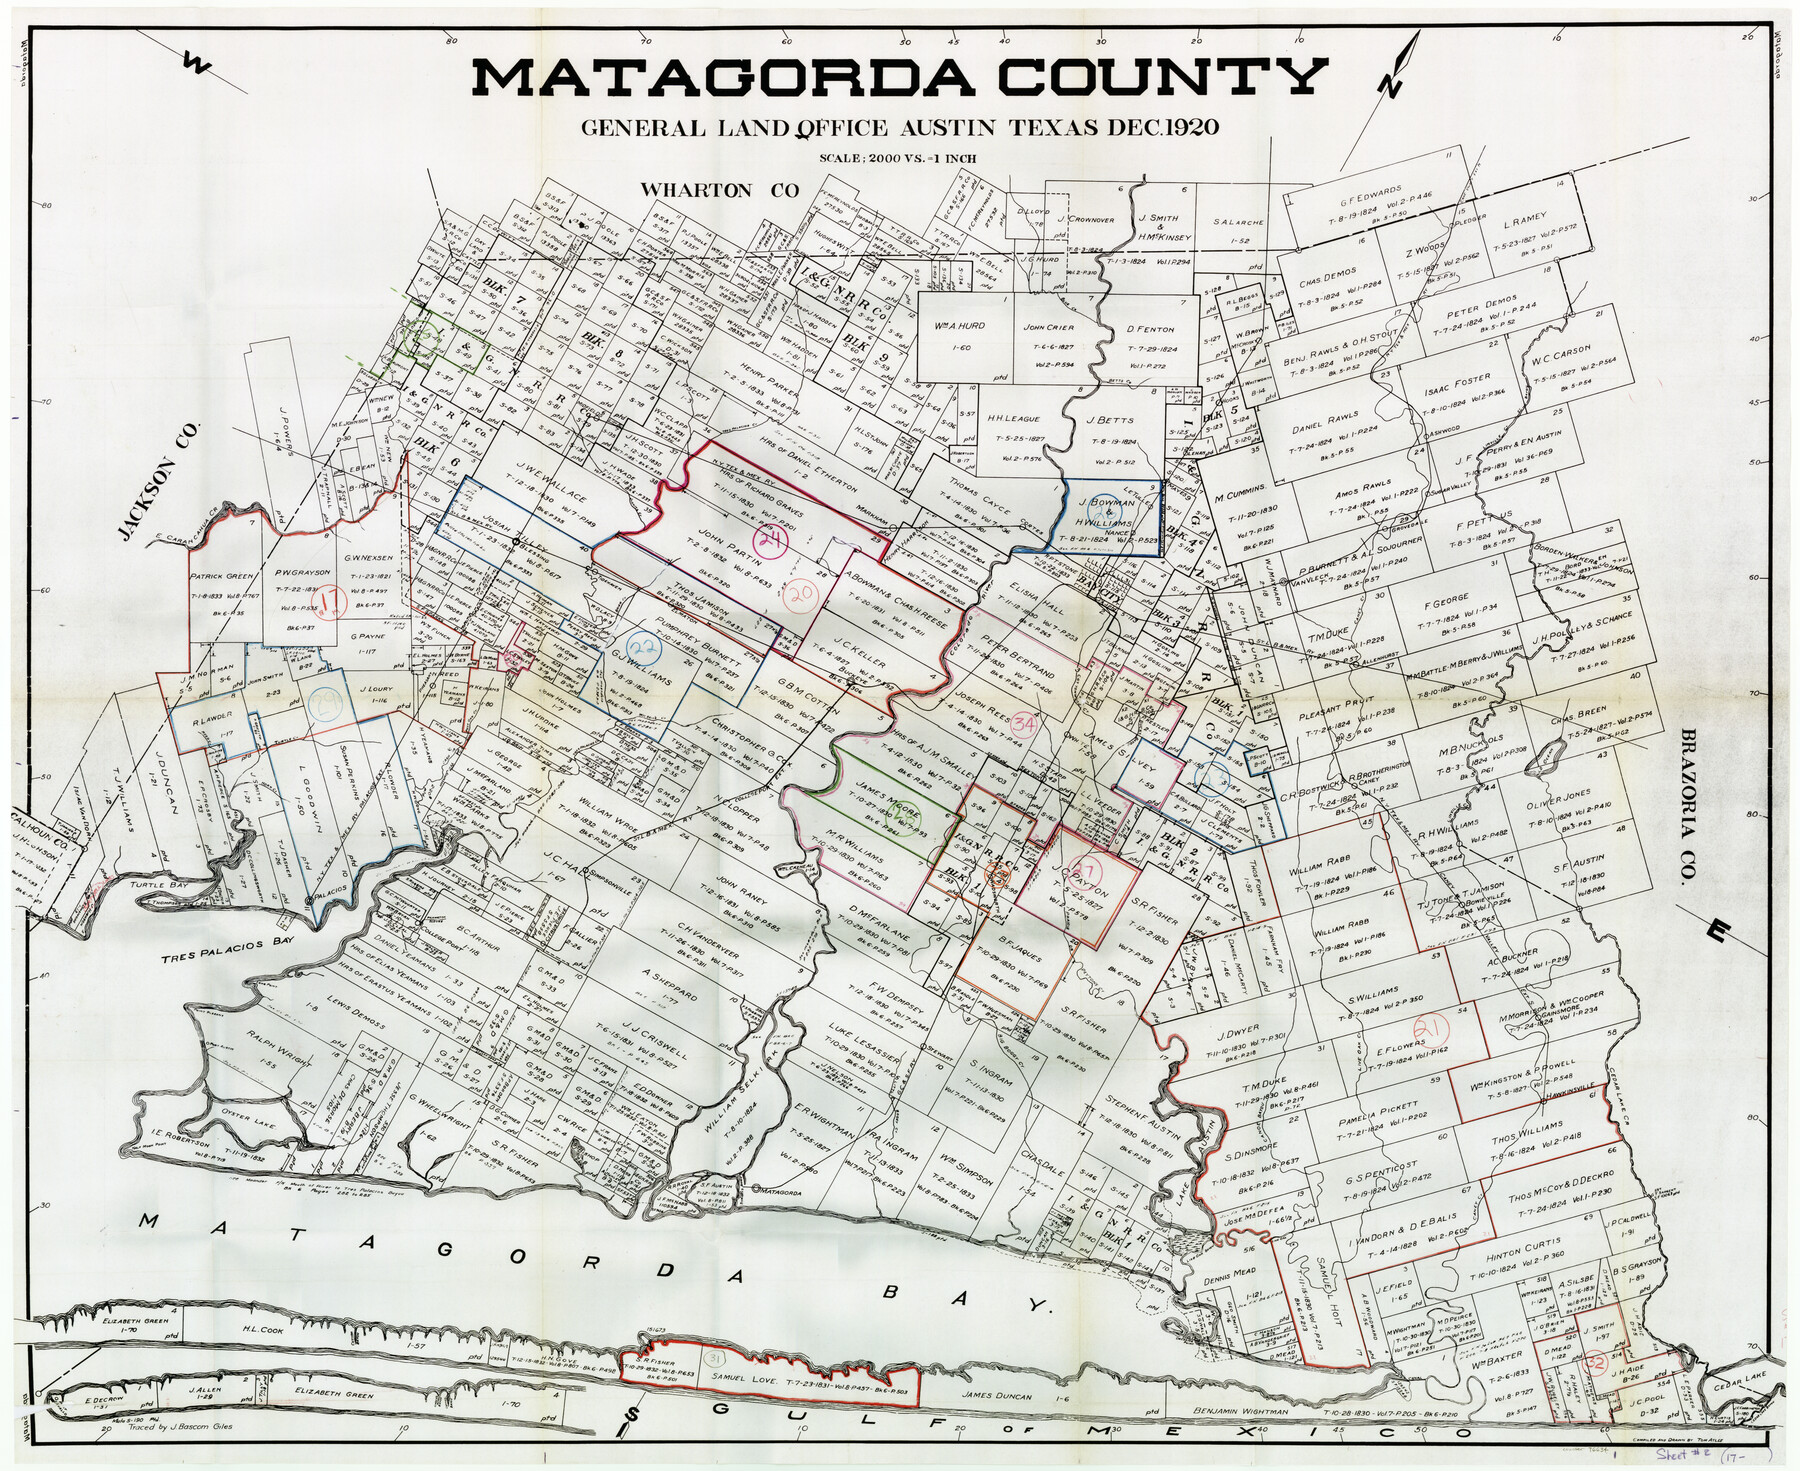 76634, Matagorda County Working Sketch Graphic Index, Sheet 2 (Sketches 17 to Most Recent), General Map Collection